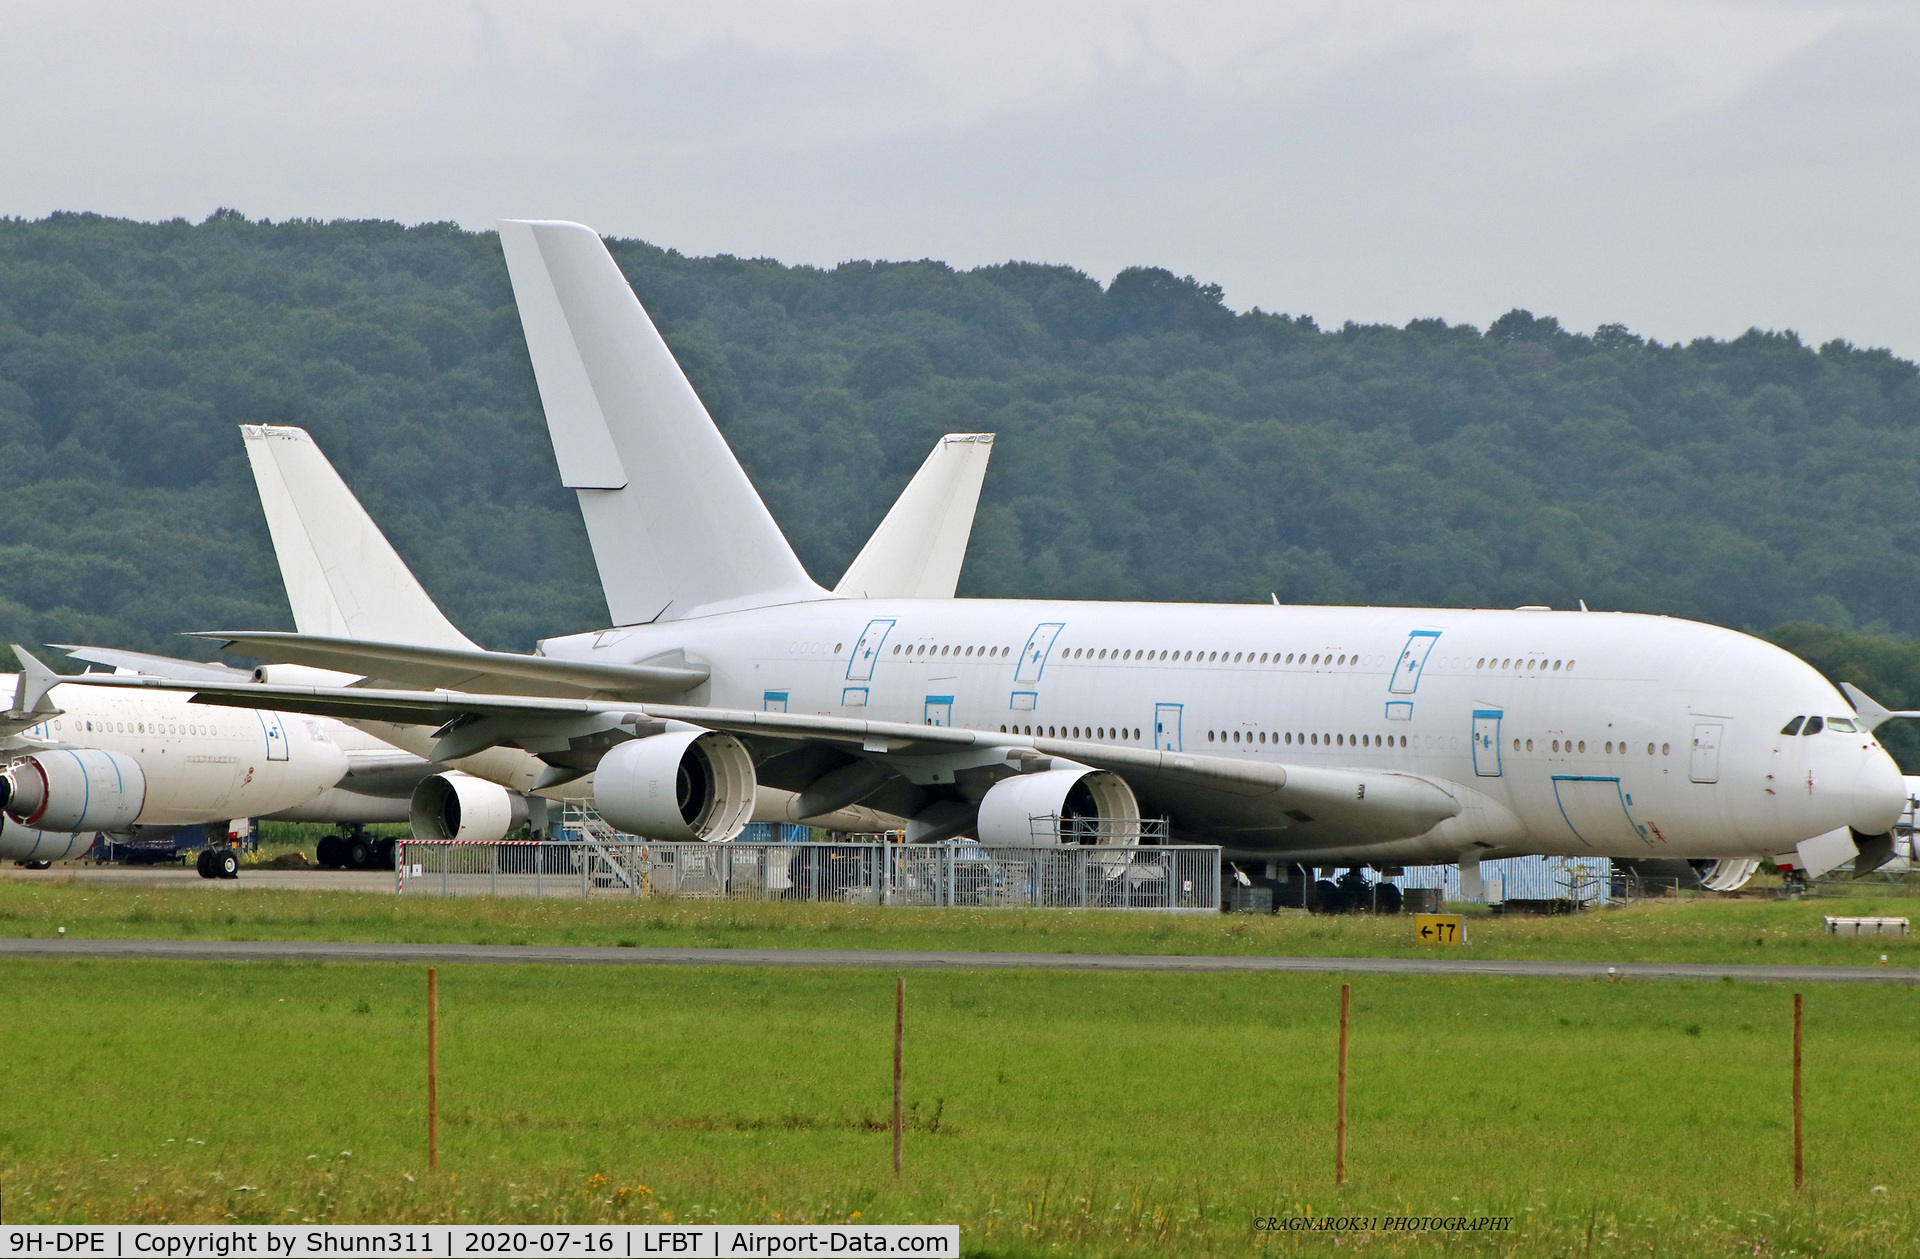 9H-DPE, 2007 Airbus A380-841 C/N 010, Stored and put at the scrapping area...